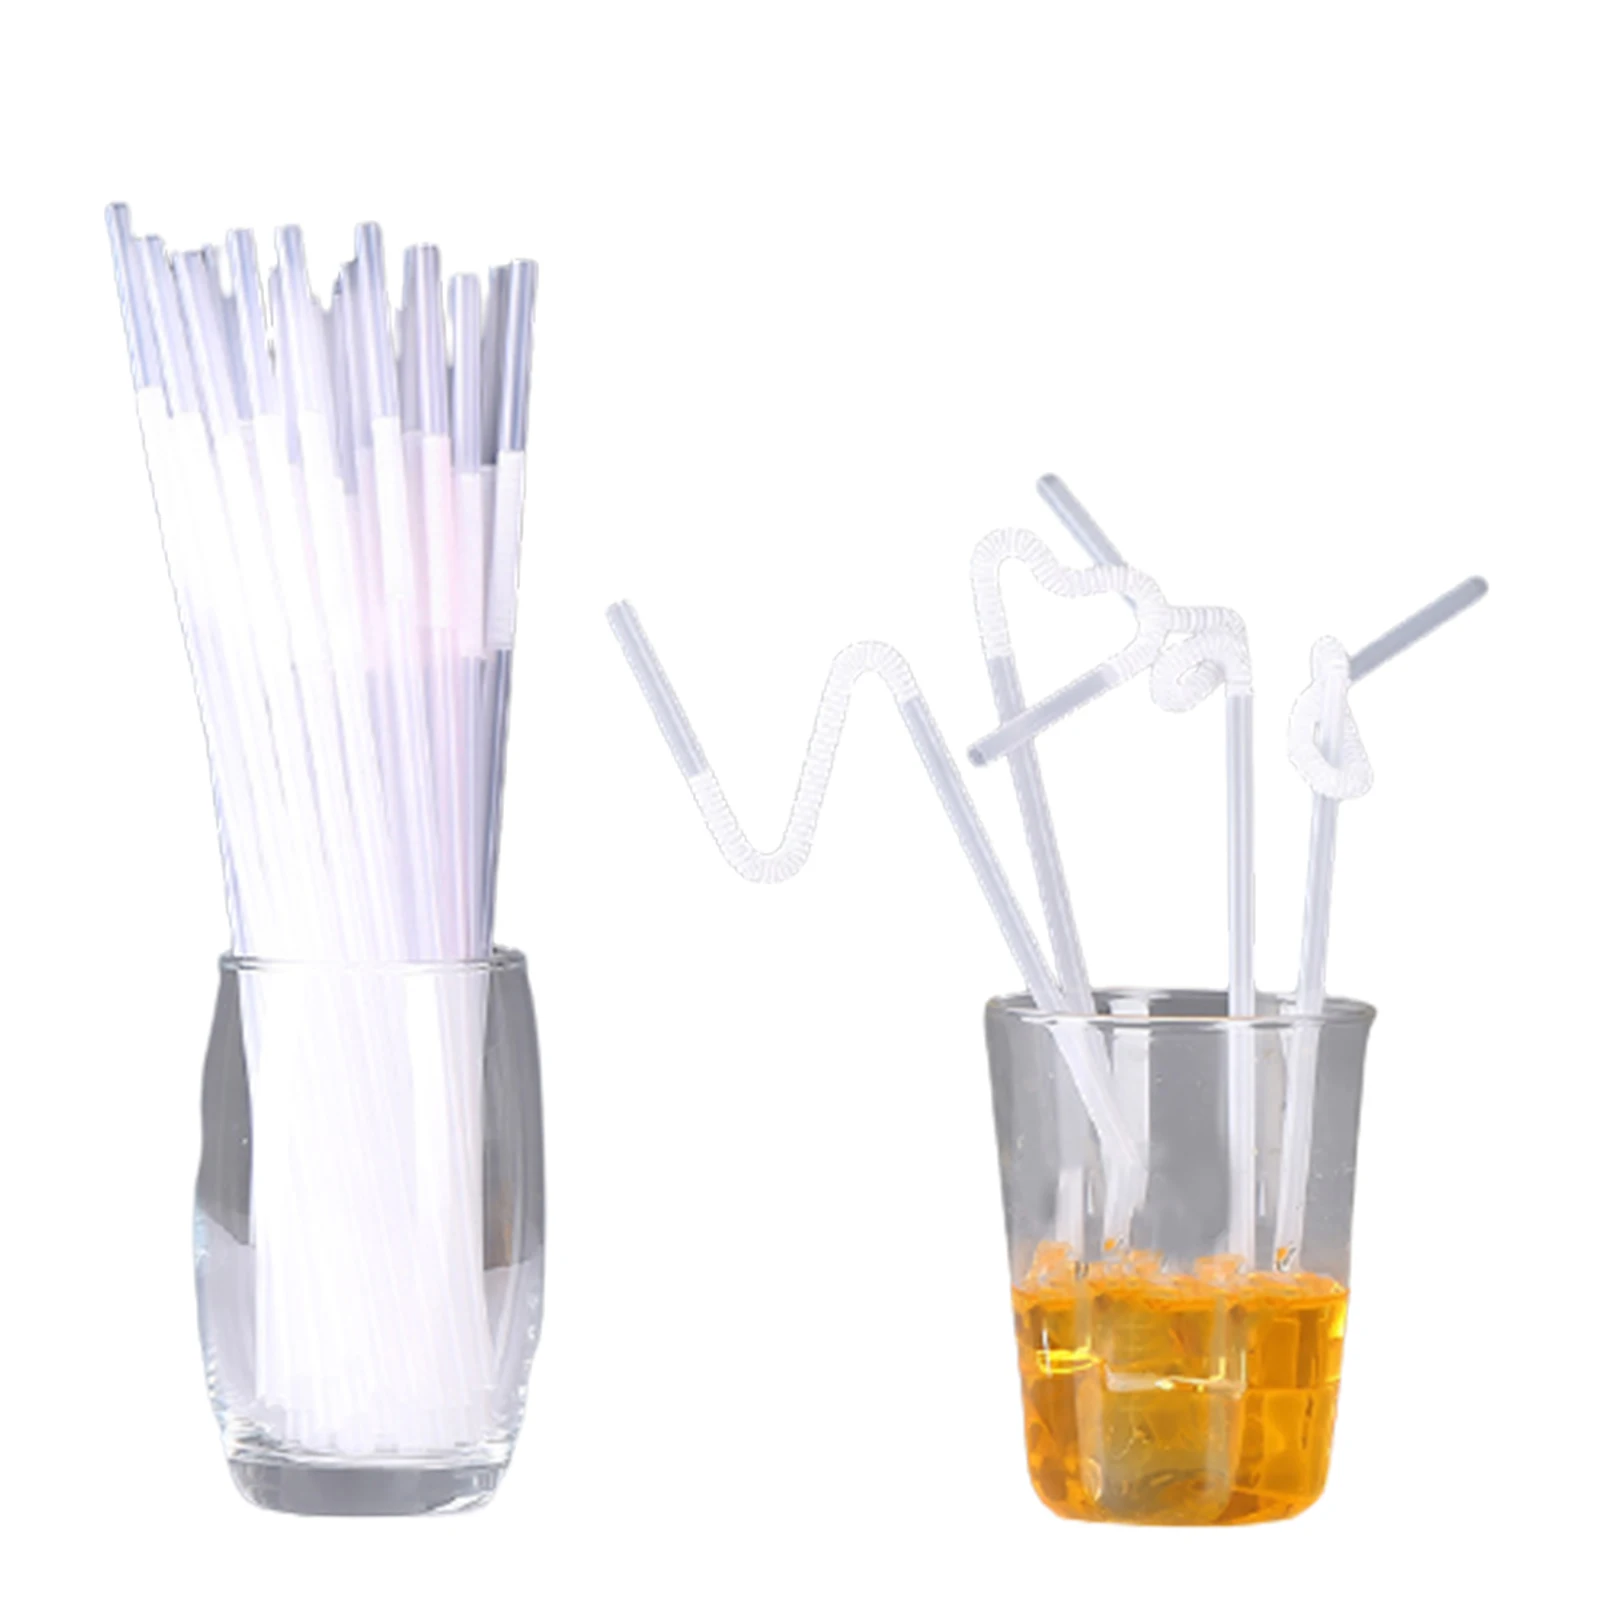 

Colorful Straws Curved Shape Lengthened Disposable Safety PP Straws for Drink K9Store